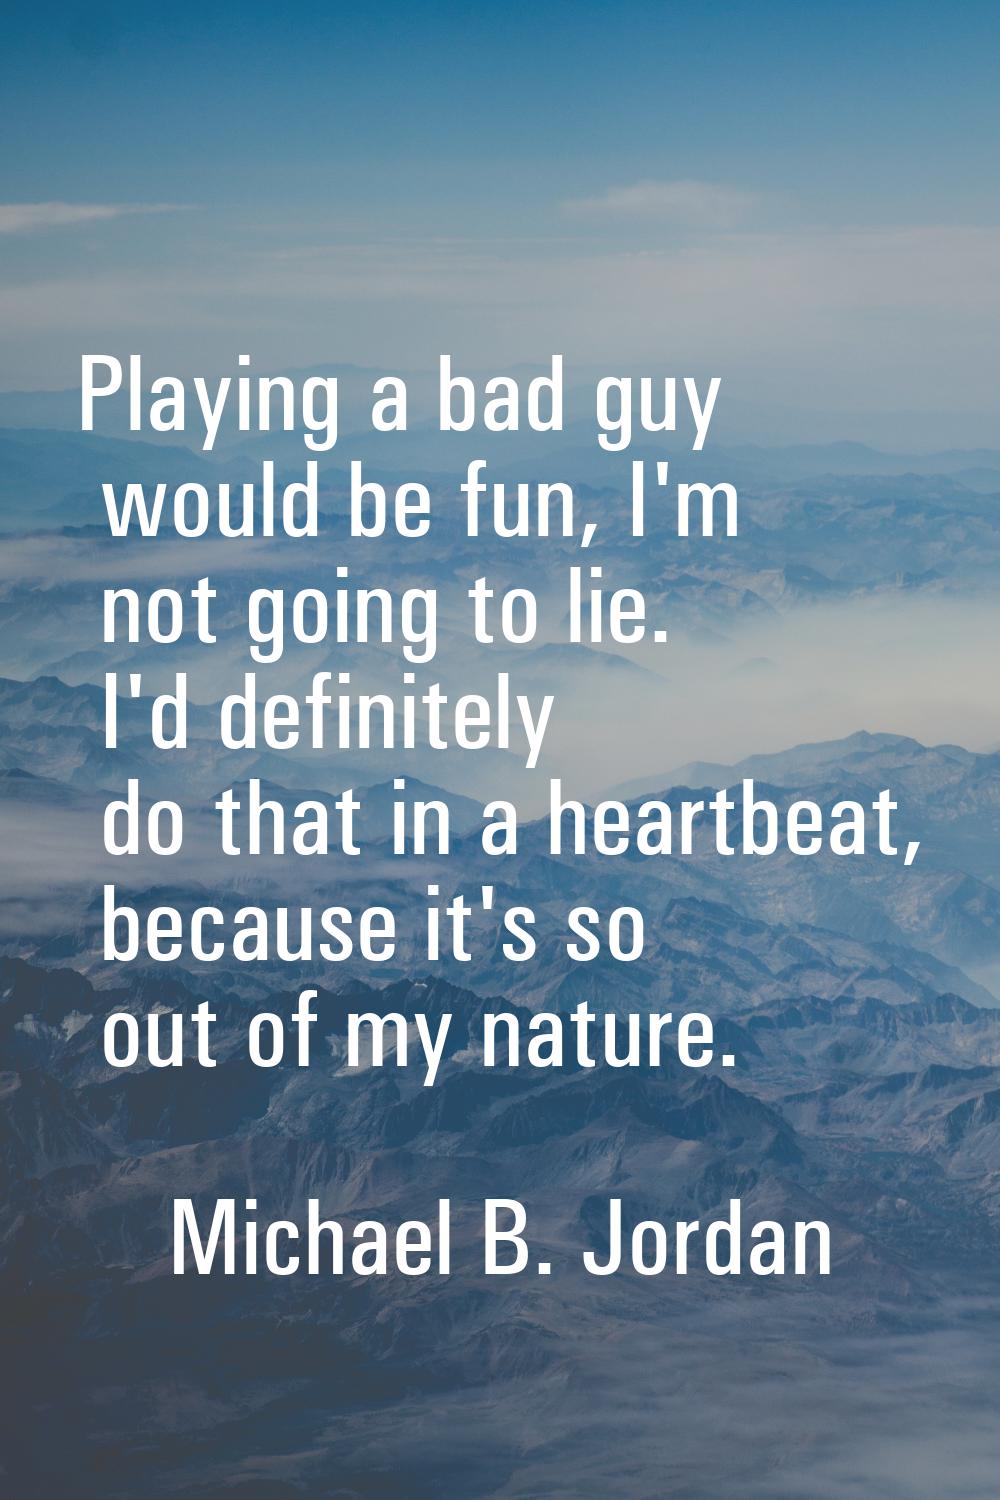 Playing a bad guy would be fun, I'm not going to lie. I'd definitely do that in a heartbeat, becaus